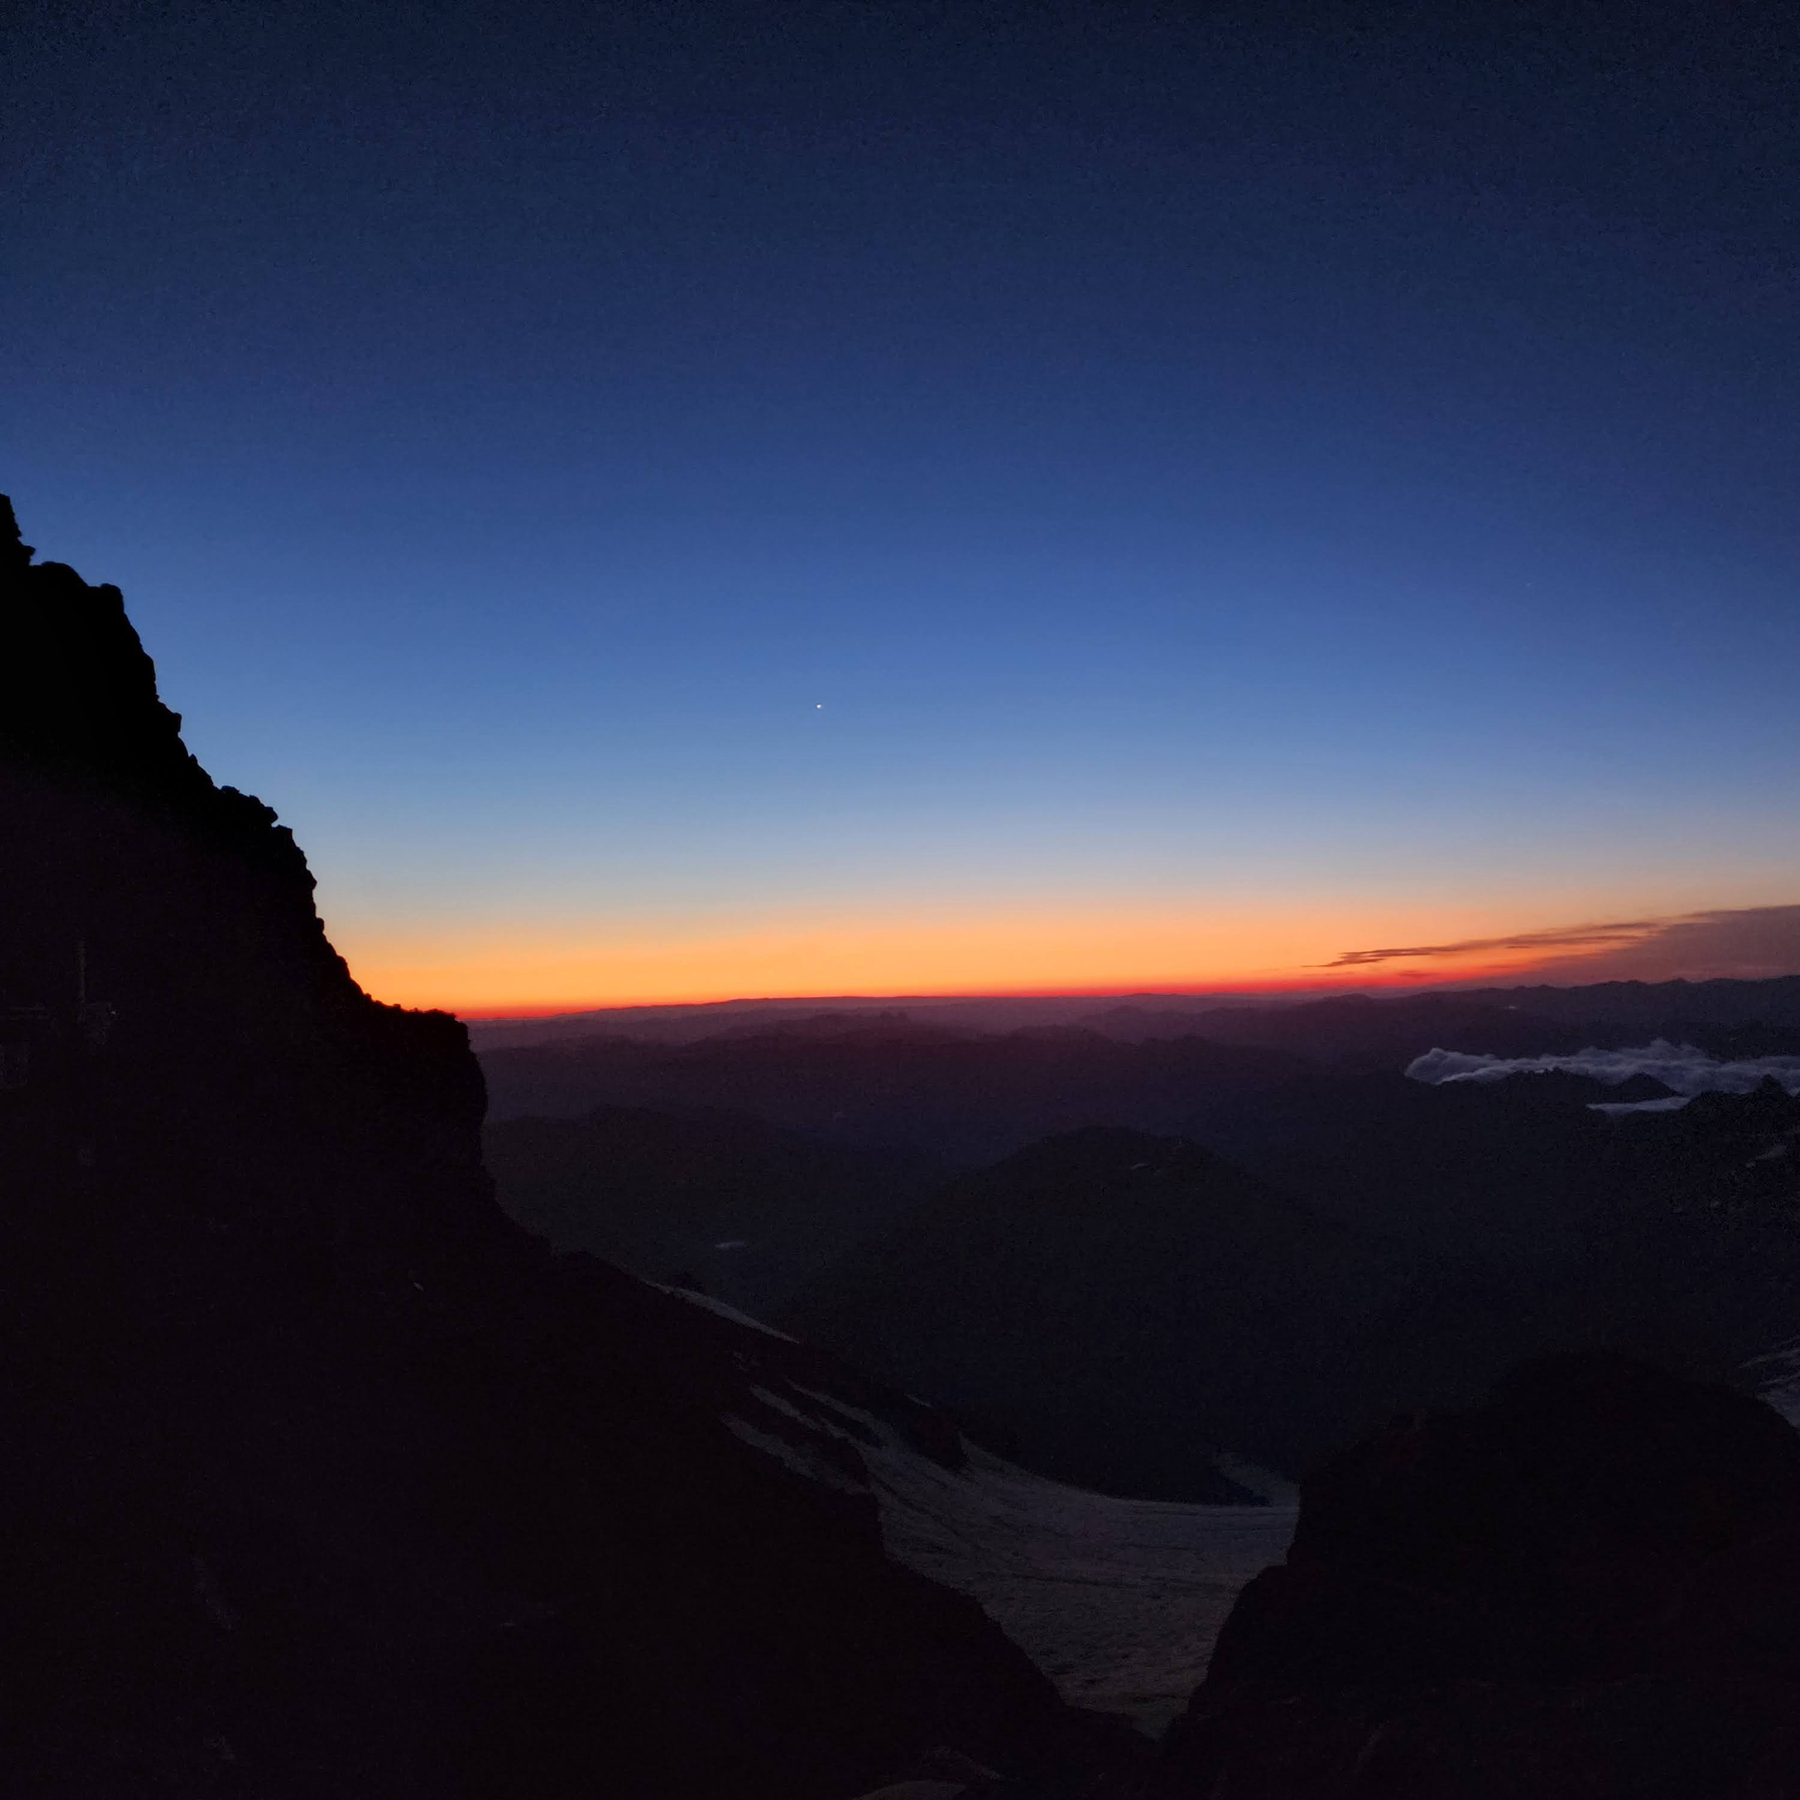 A dark sunrise from the view of a mountainside.